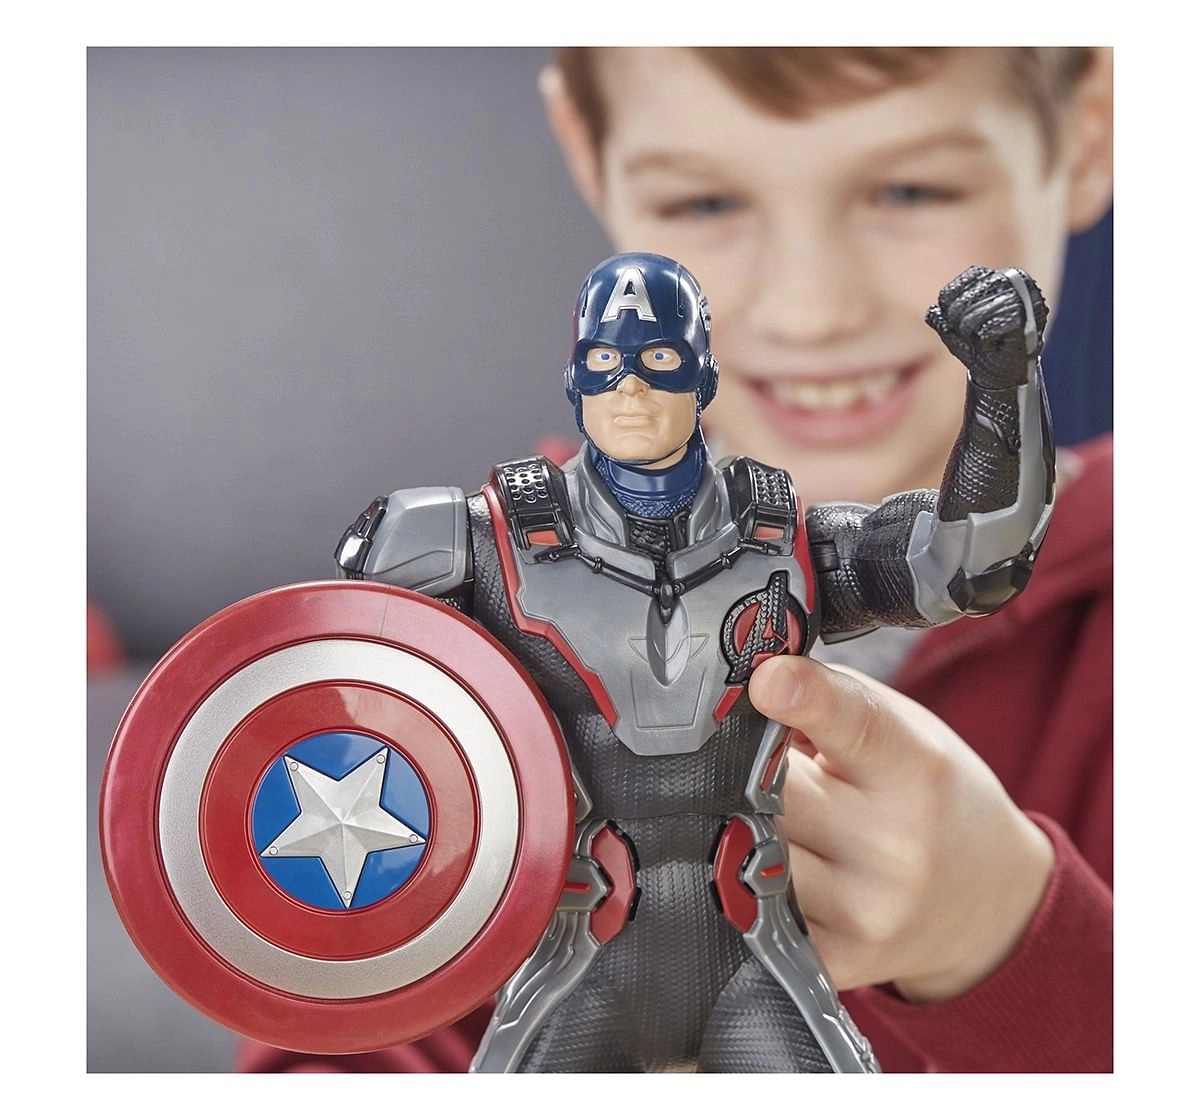 Marvel Avengers Th Power Fx 2 Hero Captain America Action Figures for age 4Y+ 